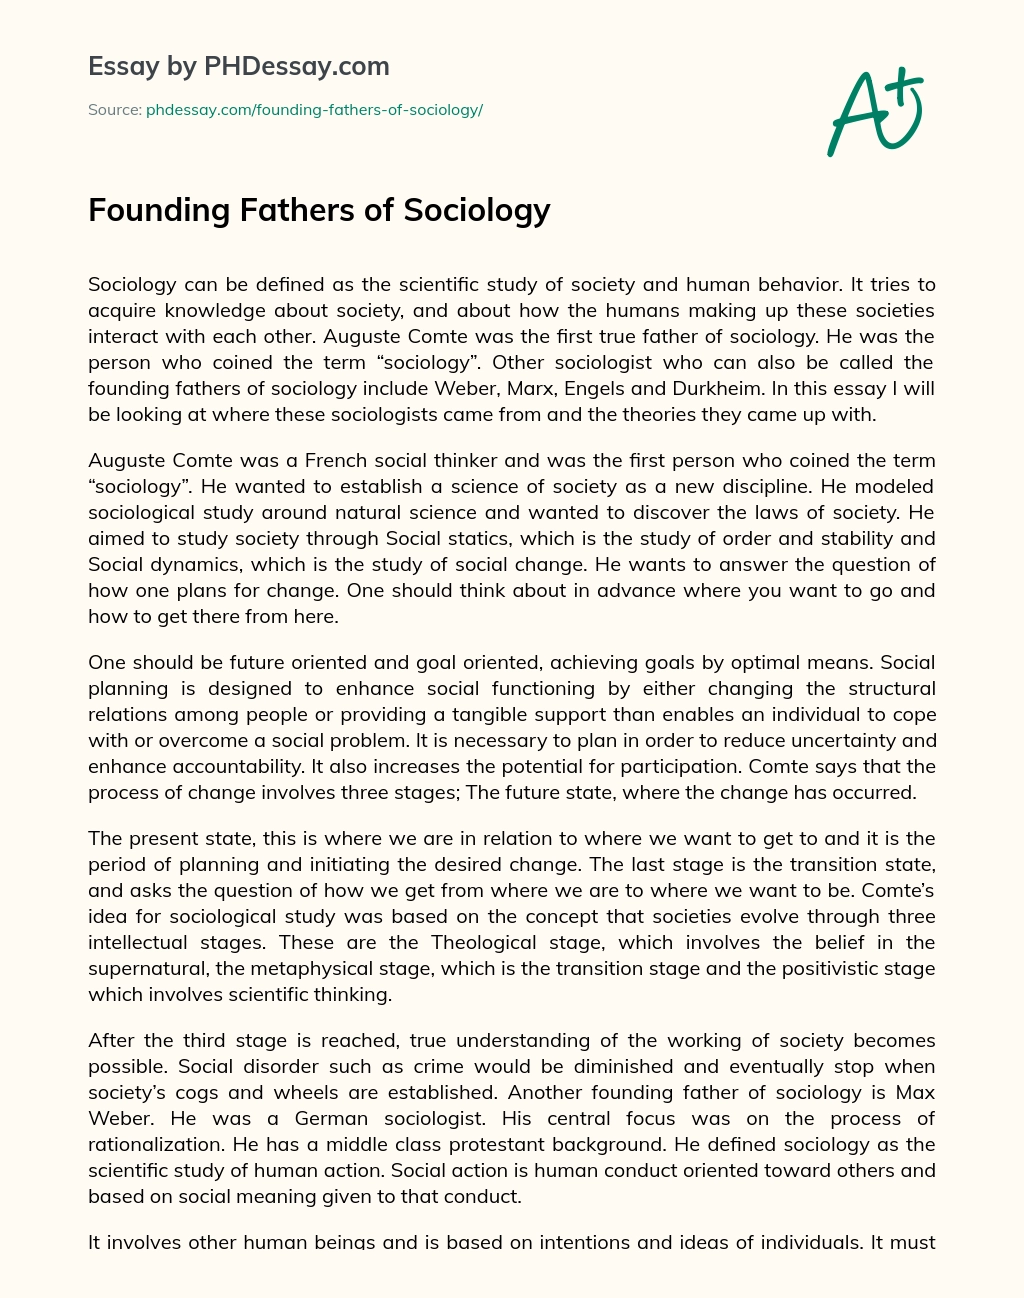 Founding Fathers of Sociology essay